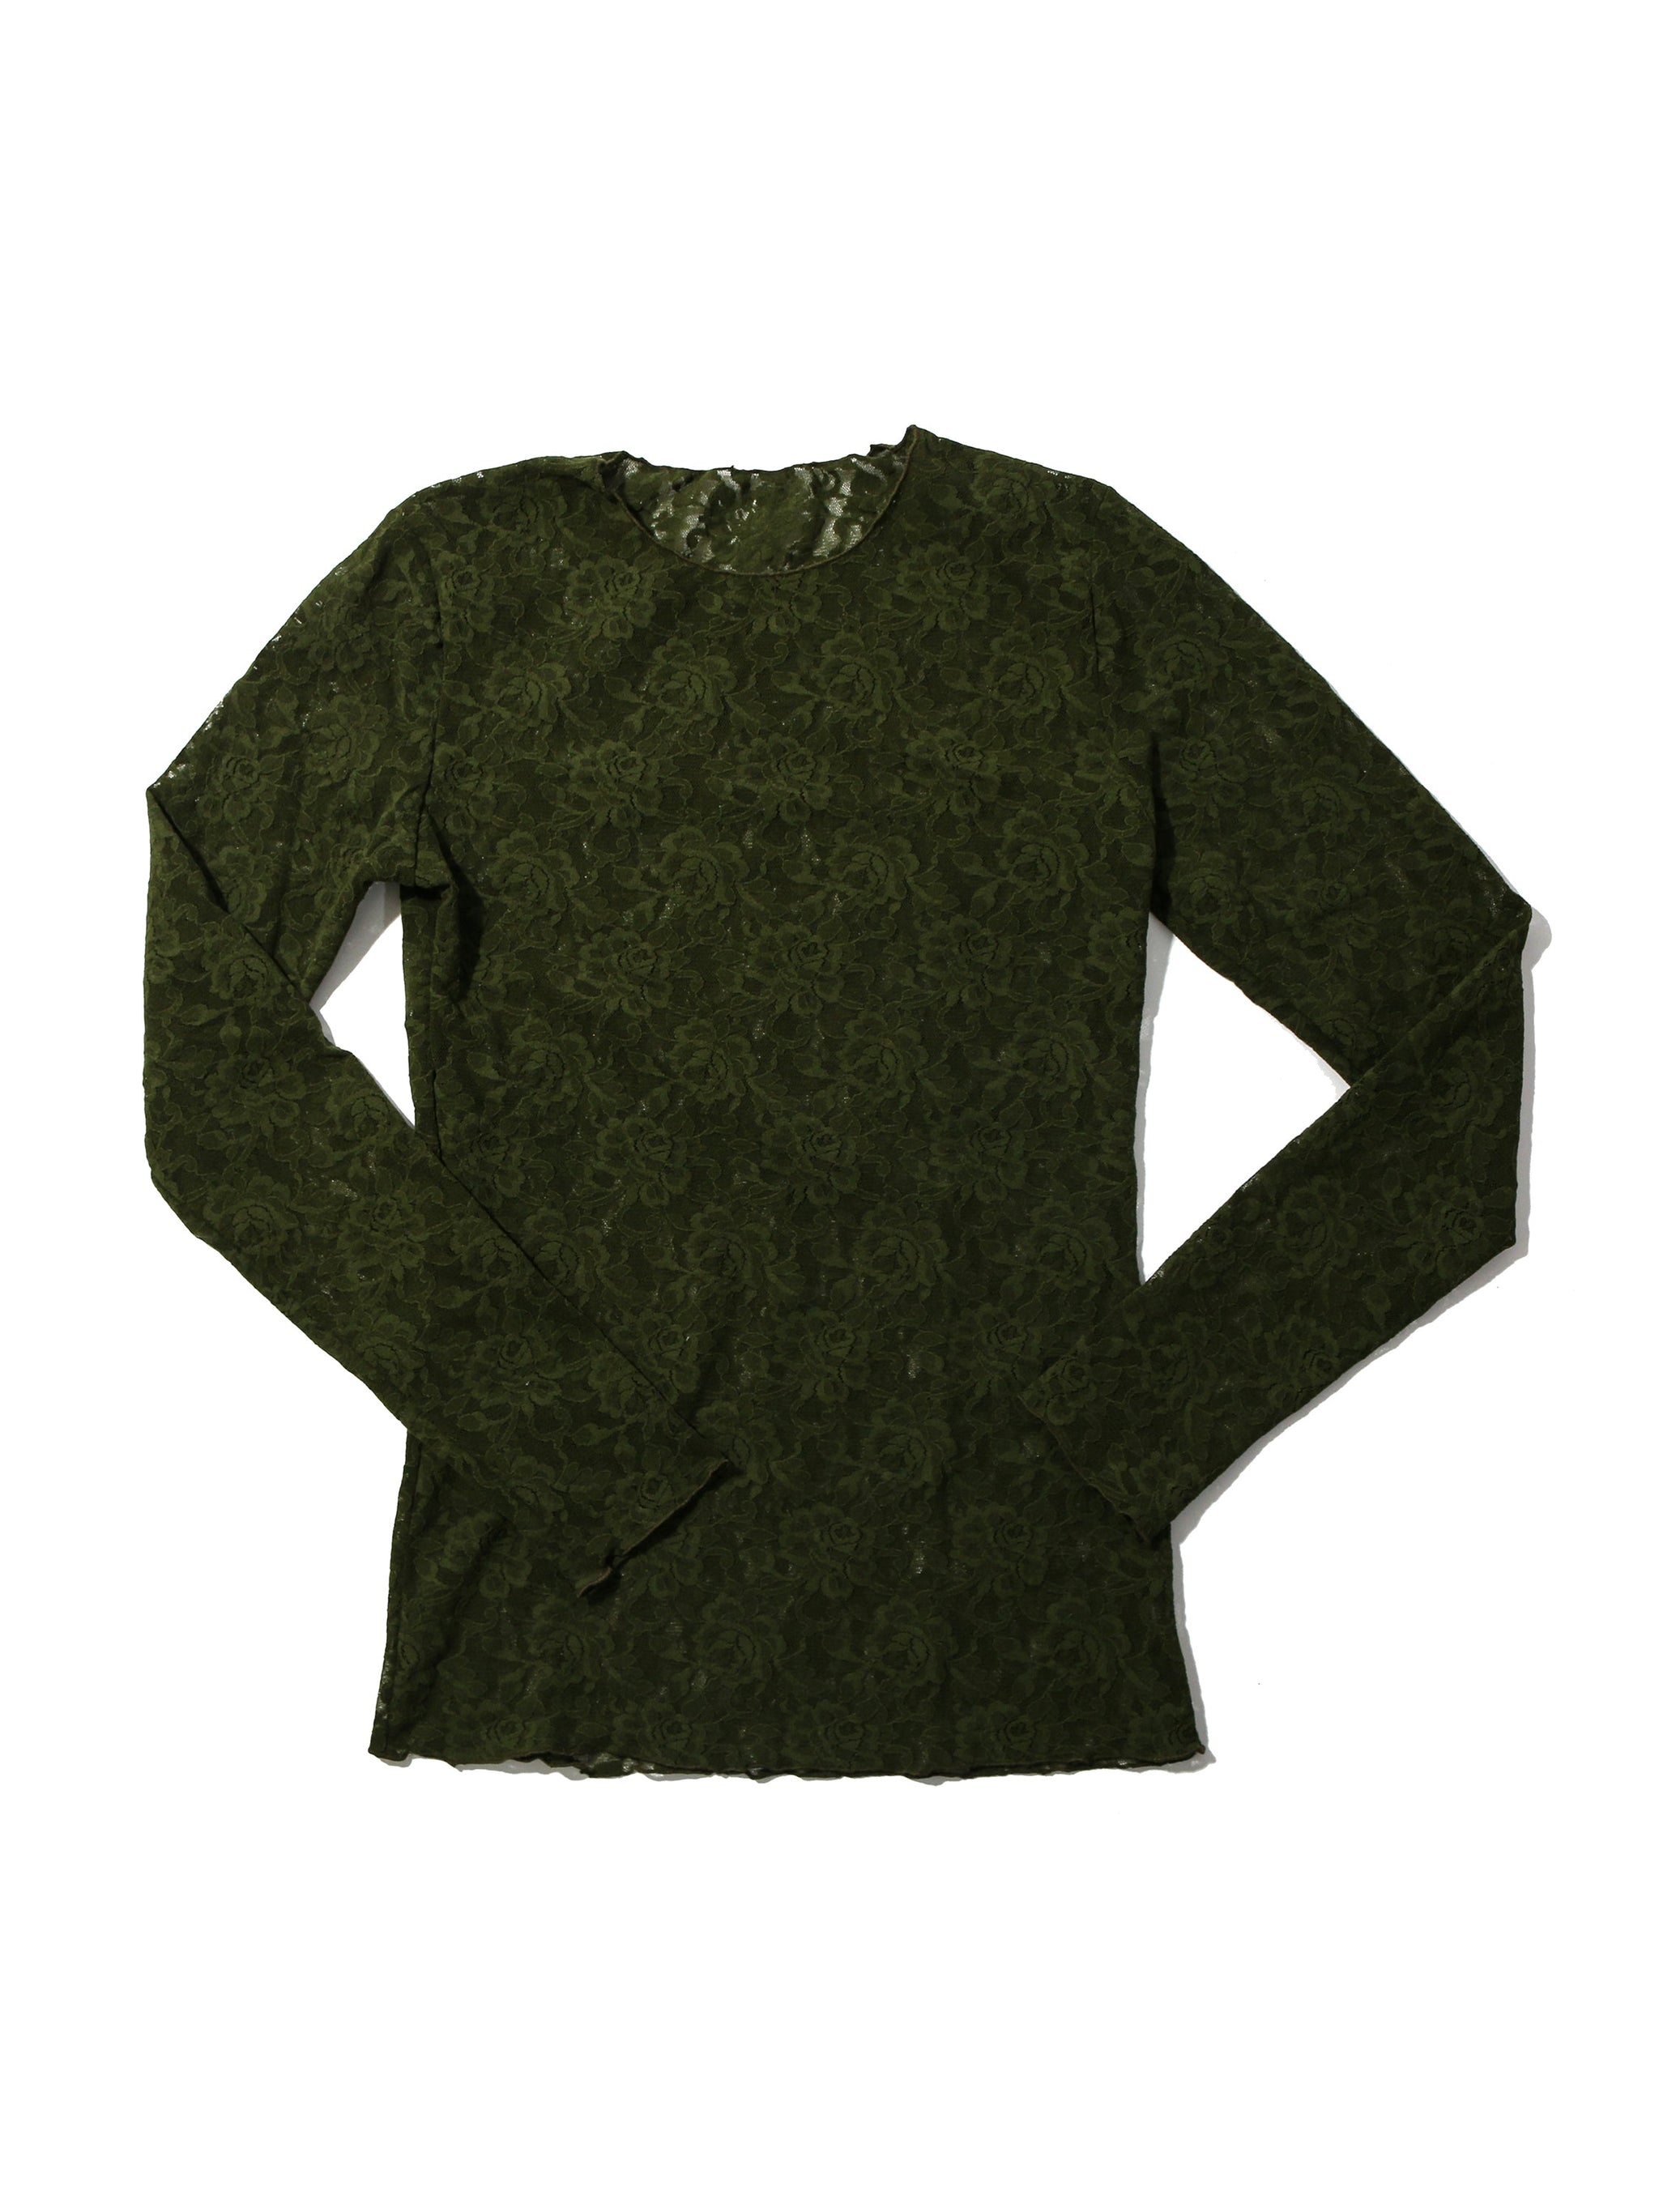 Signature Lace Long Sleeve Top Woodland Green